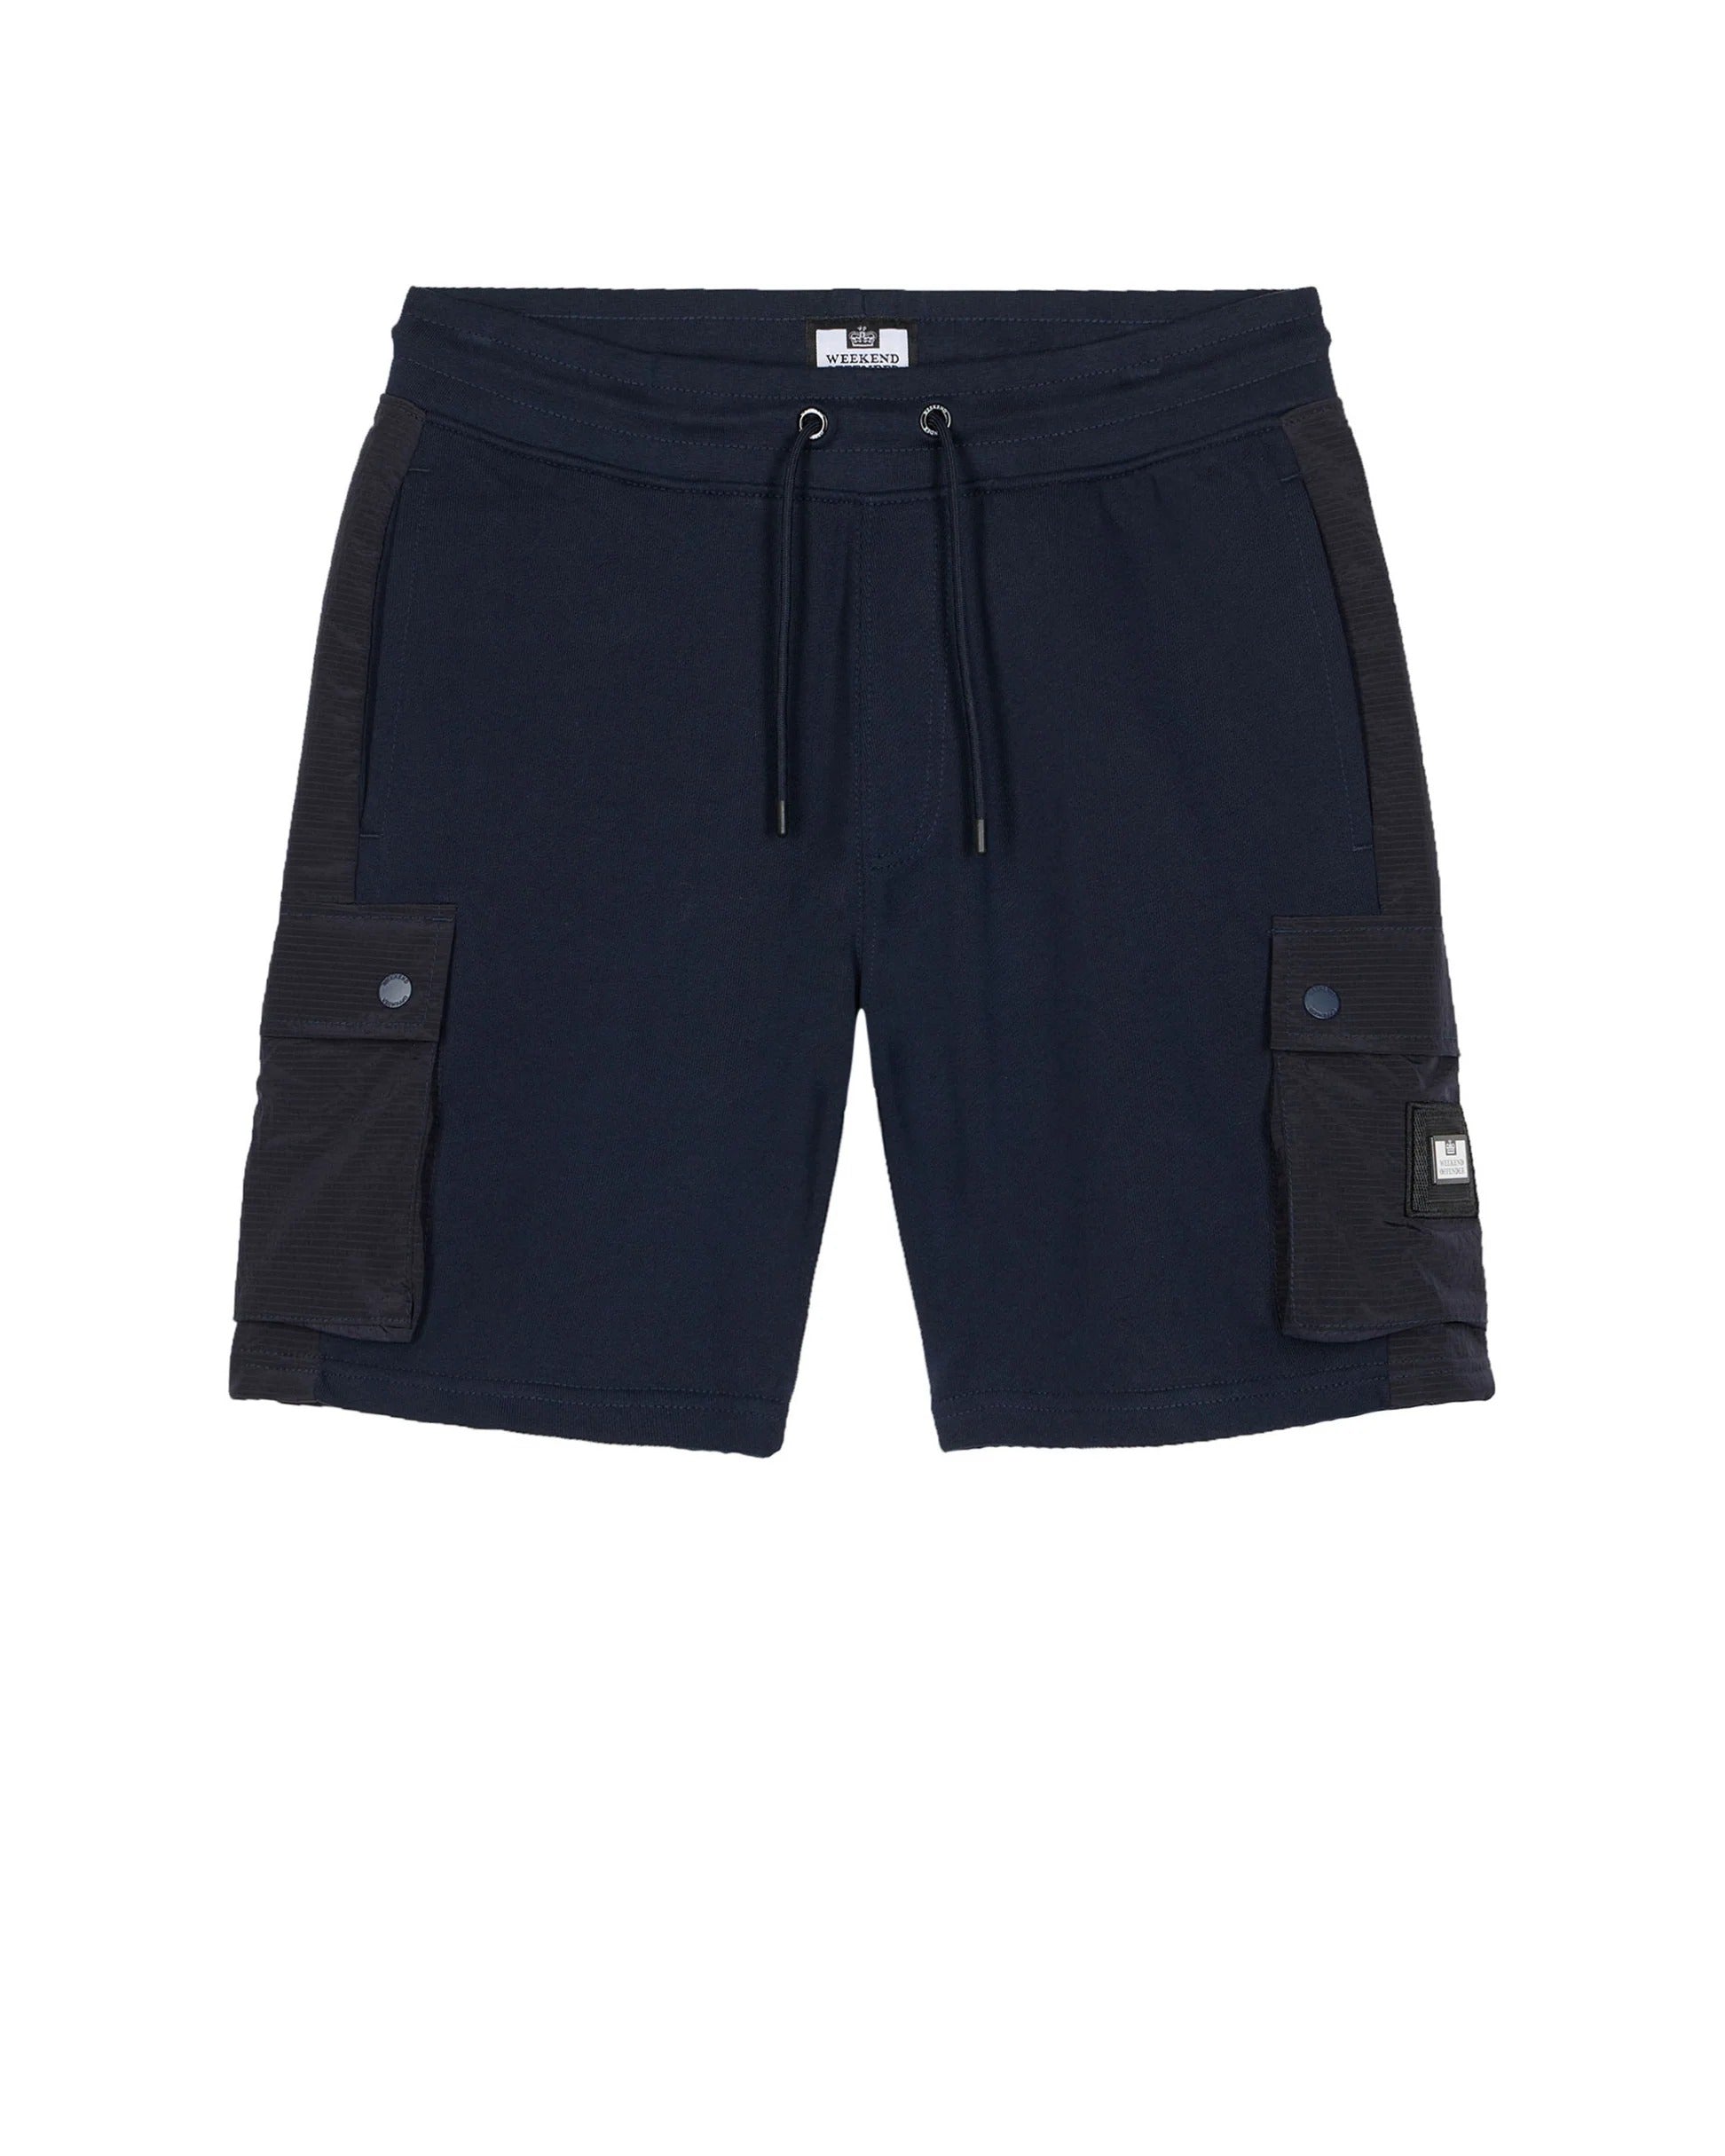 Weekend Offender Pink Sands Jogger Shorts in Navy